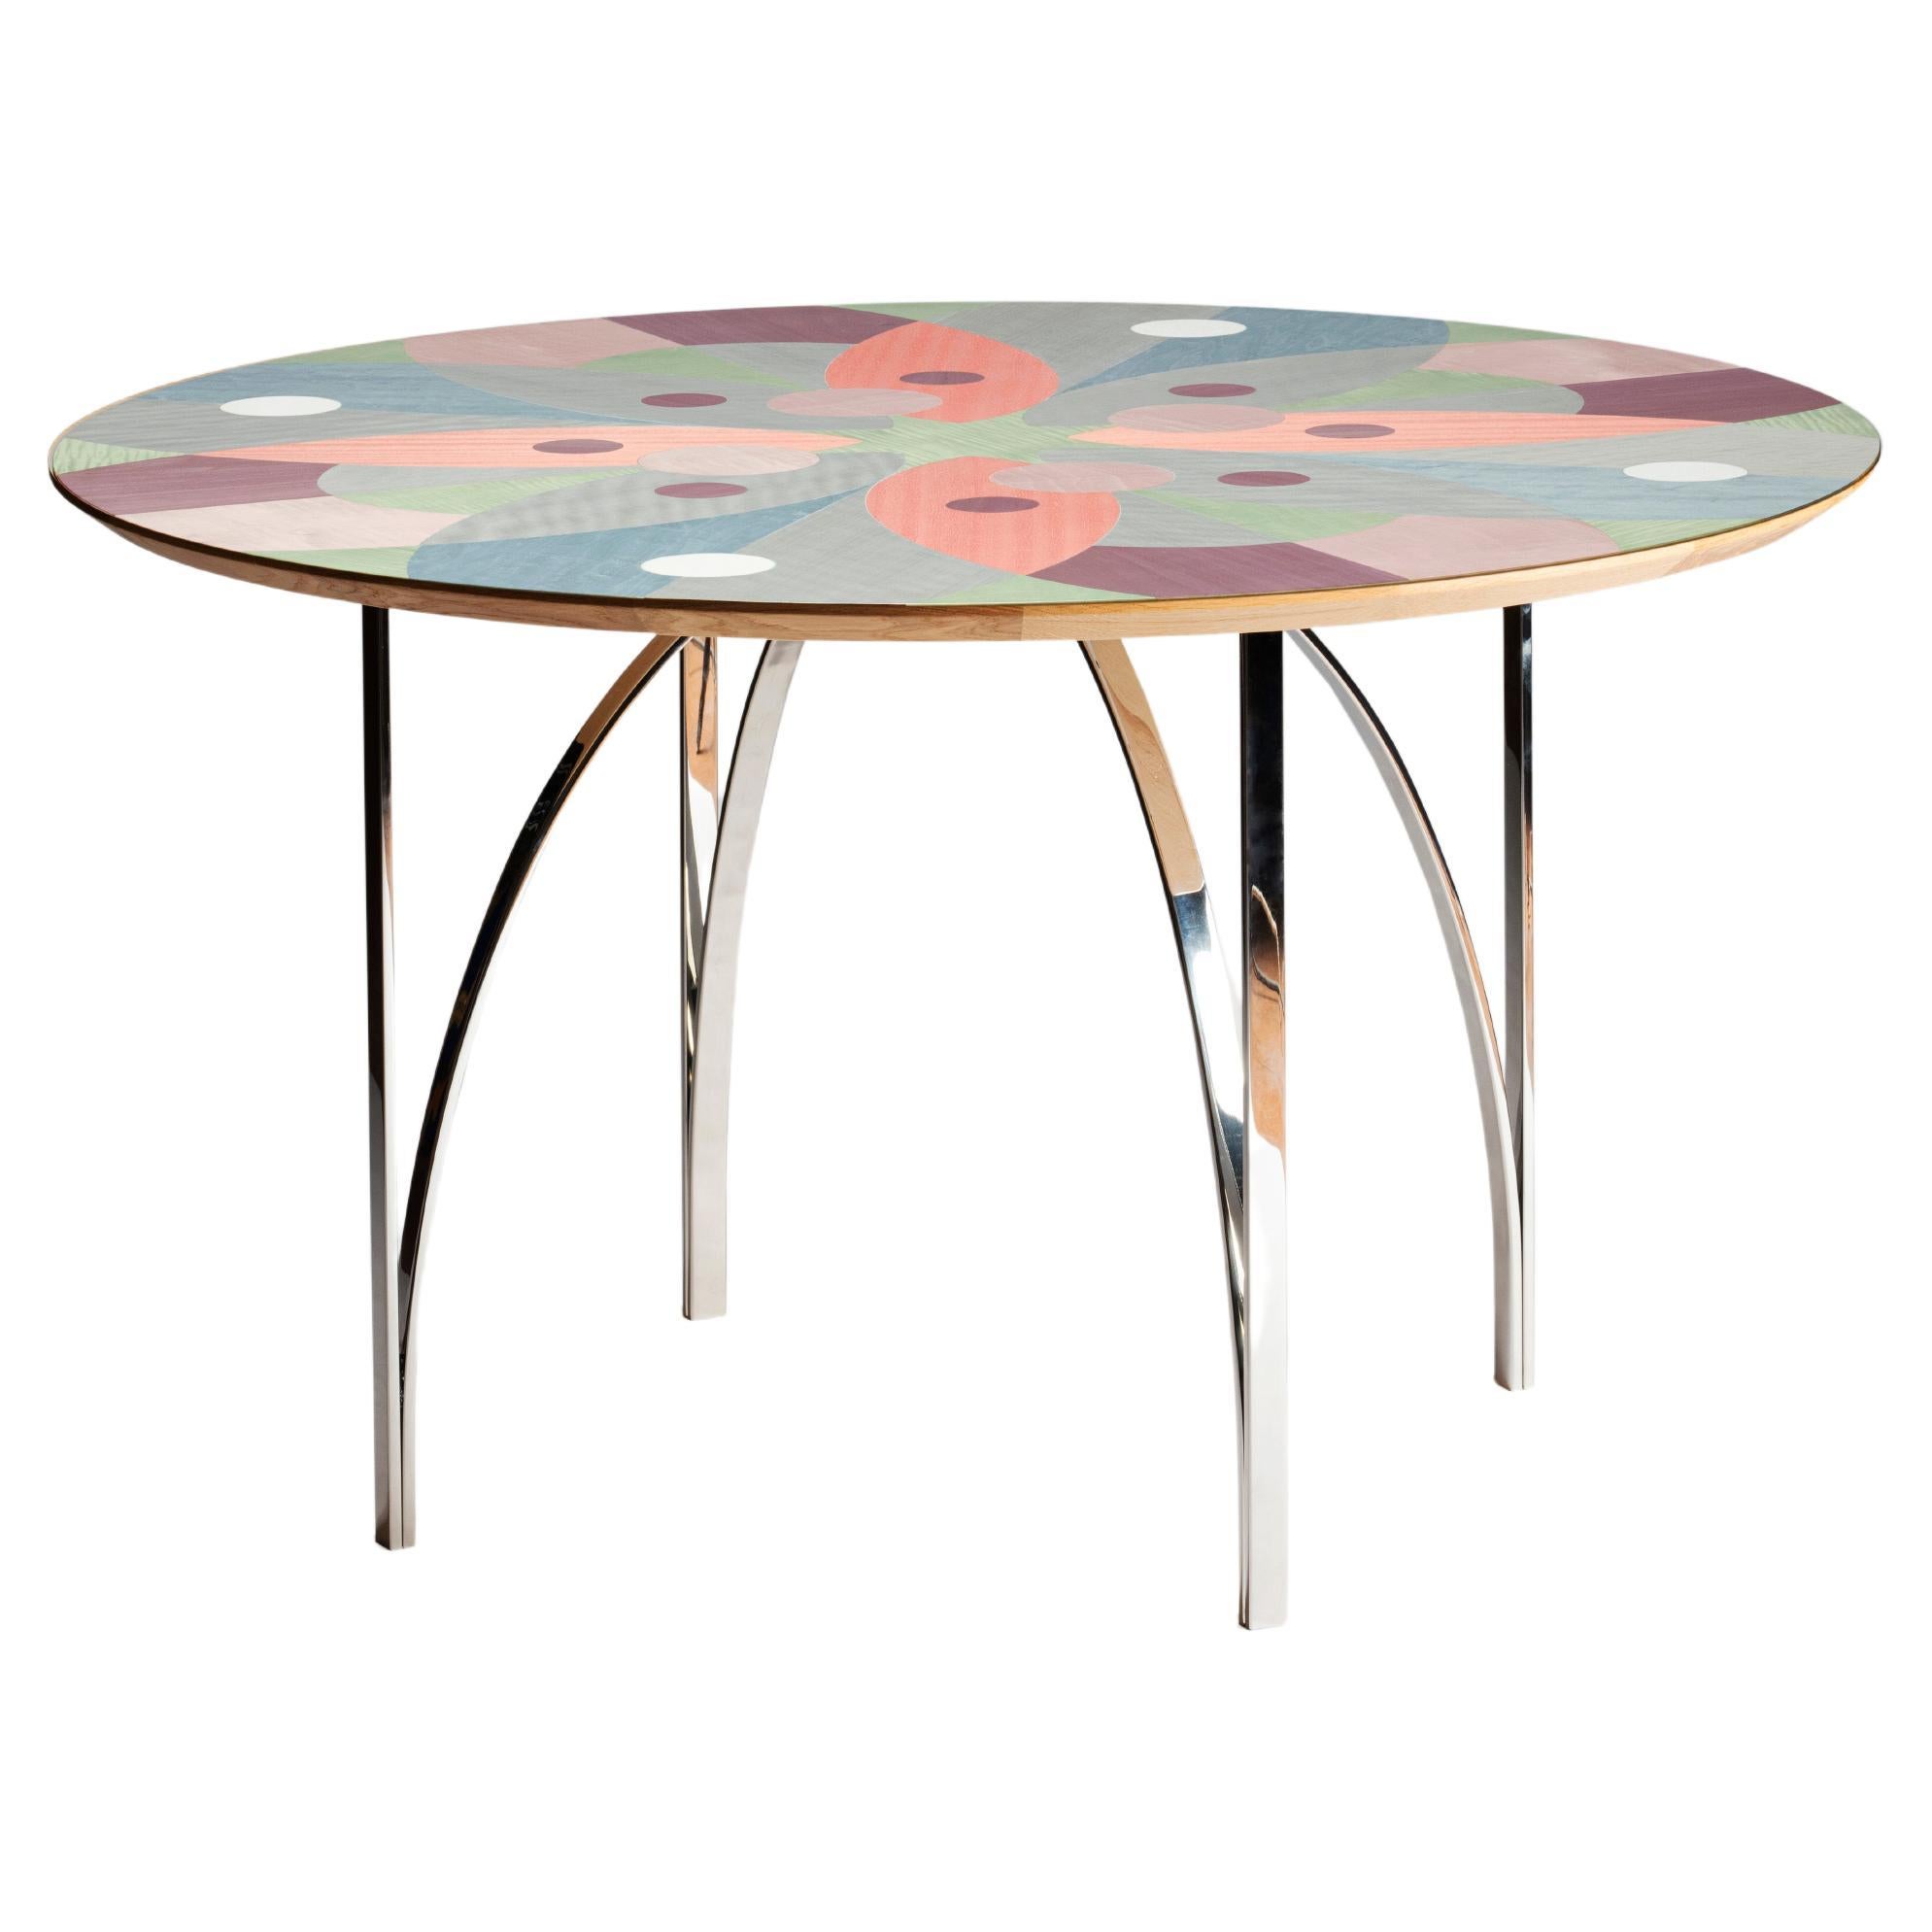 Contemporary Dining Center Table Serena Confalonieri Medulum Wood Colored Steel For Sale